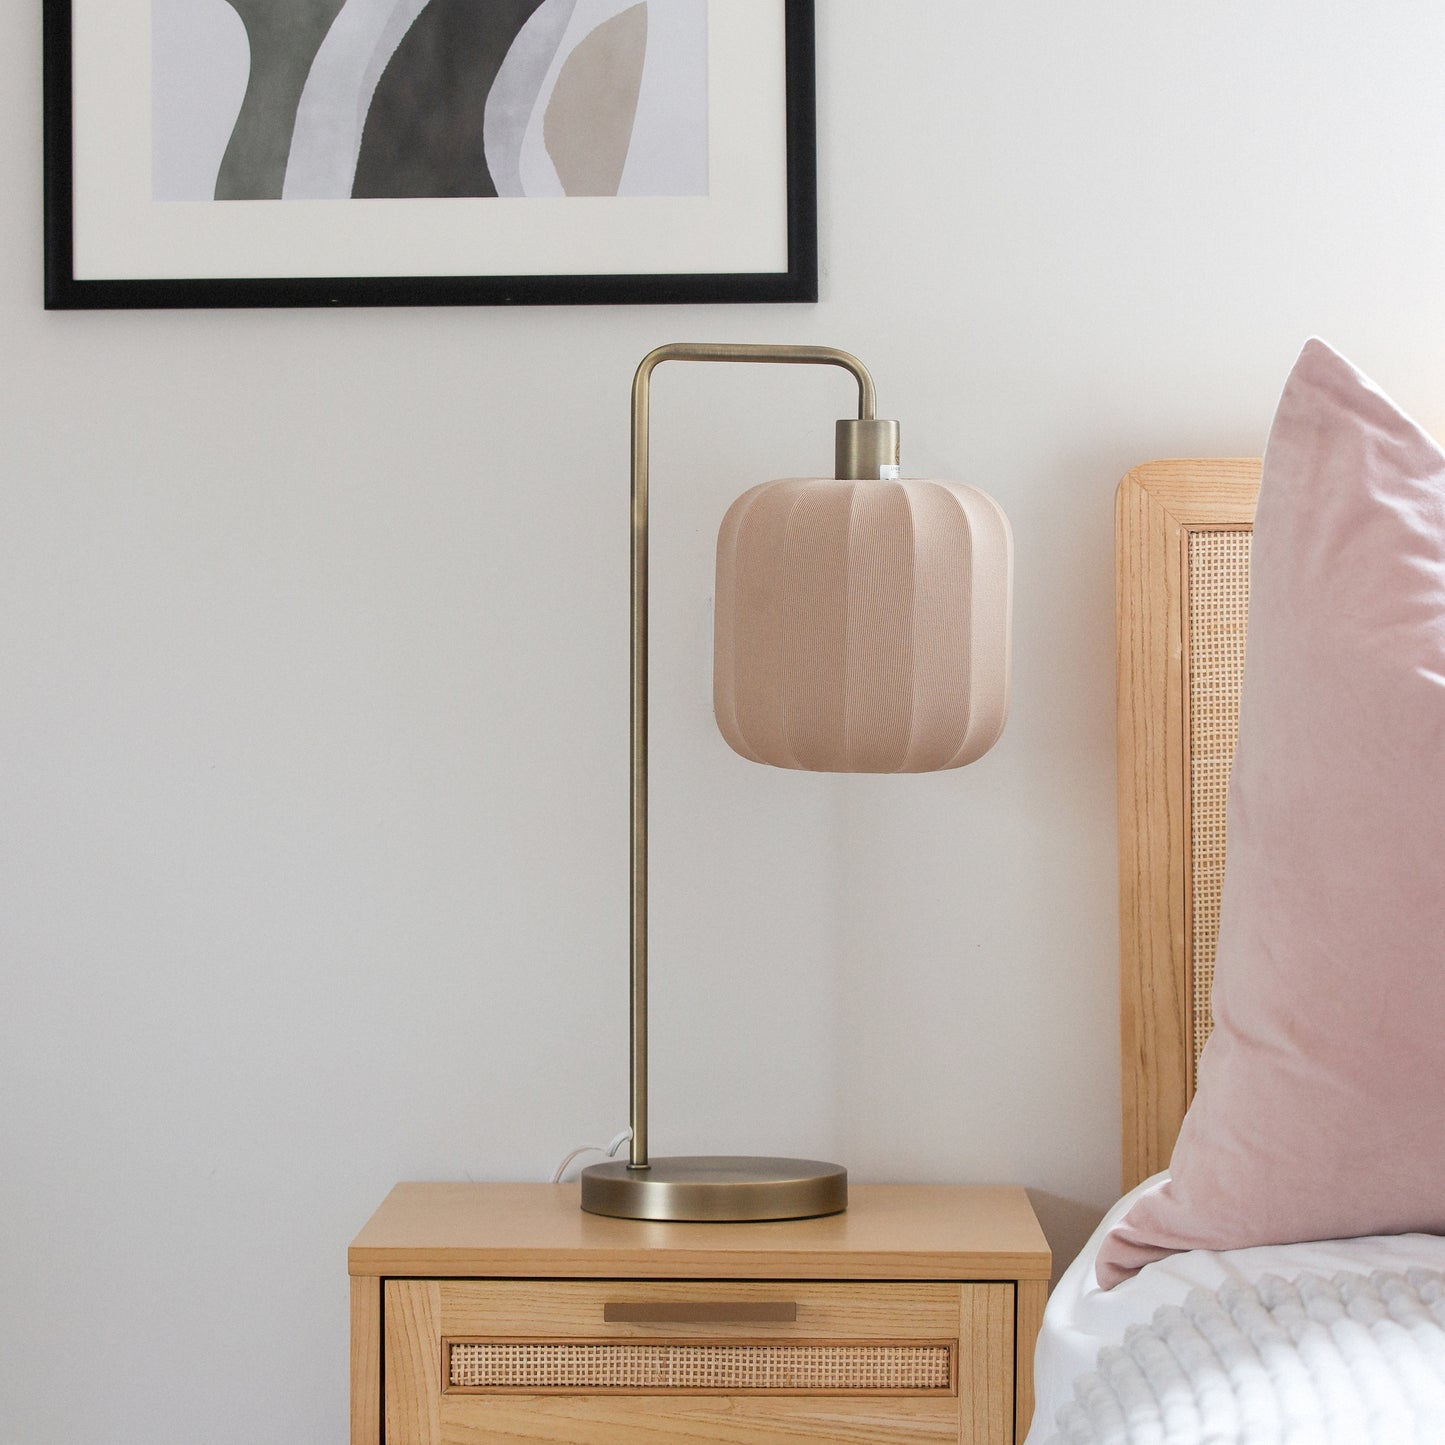 Soft Gold and Taupe Lamp